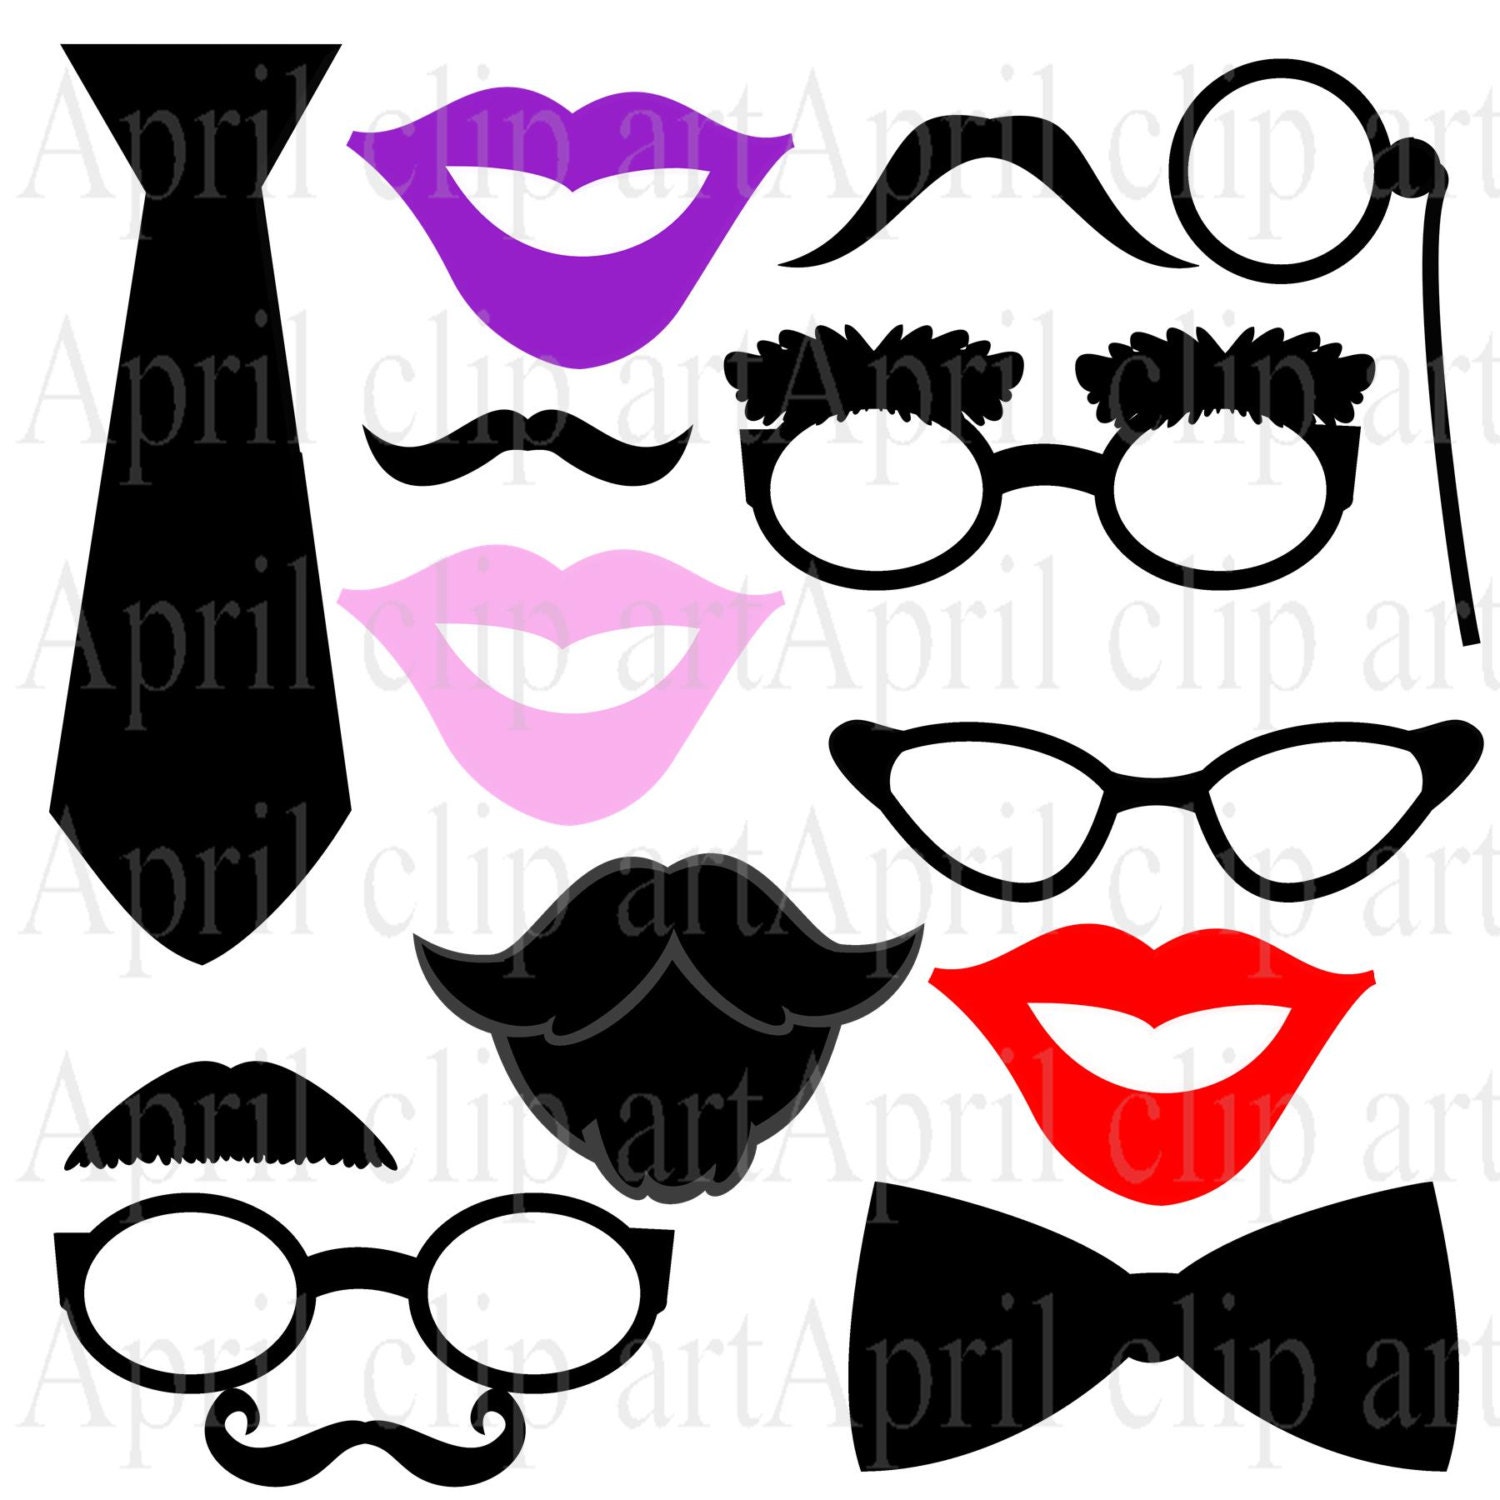 photo booth clipart - photo #7